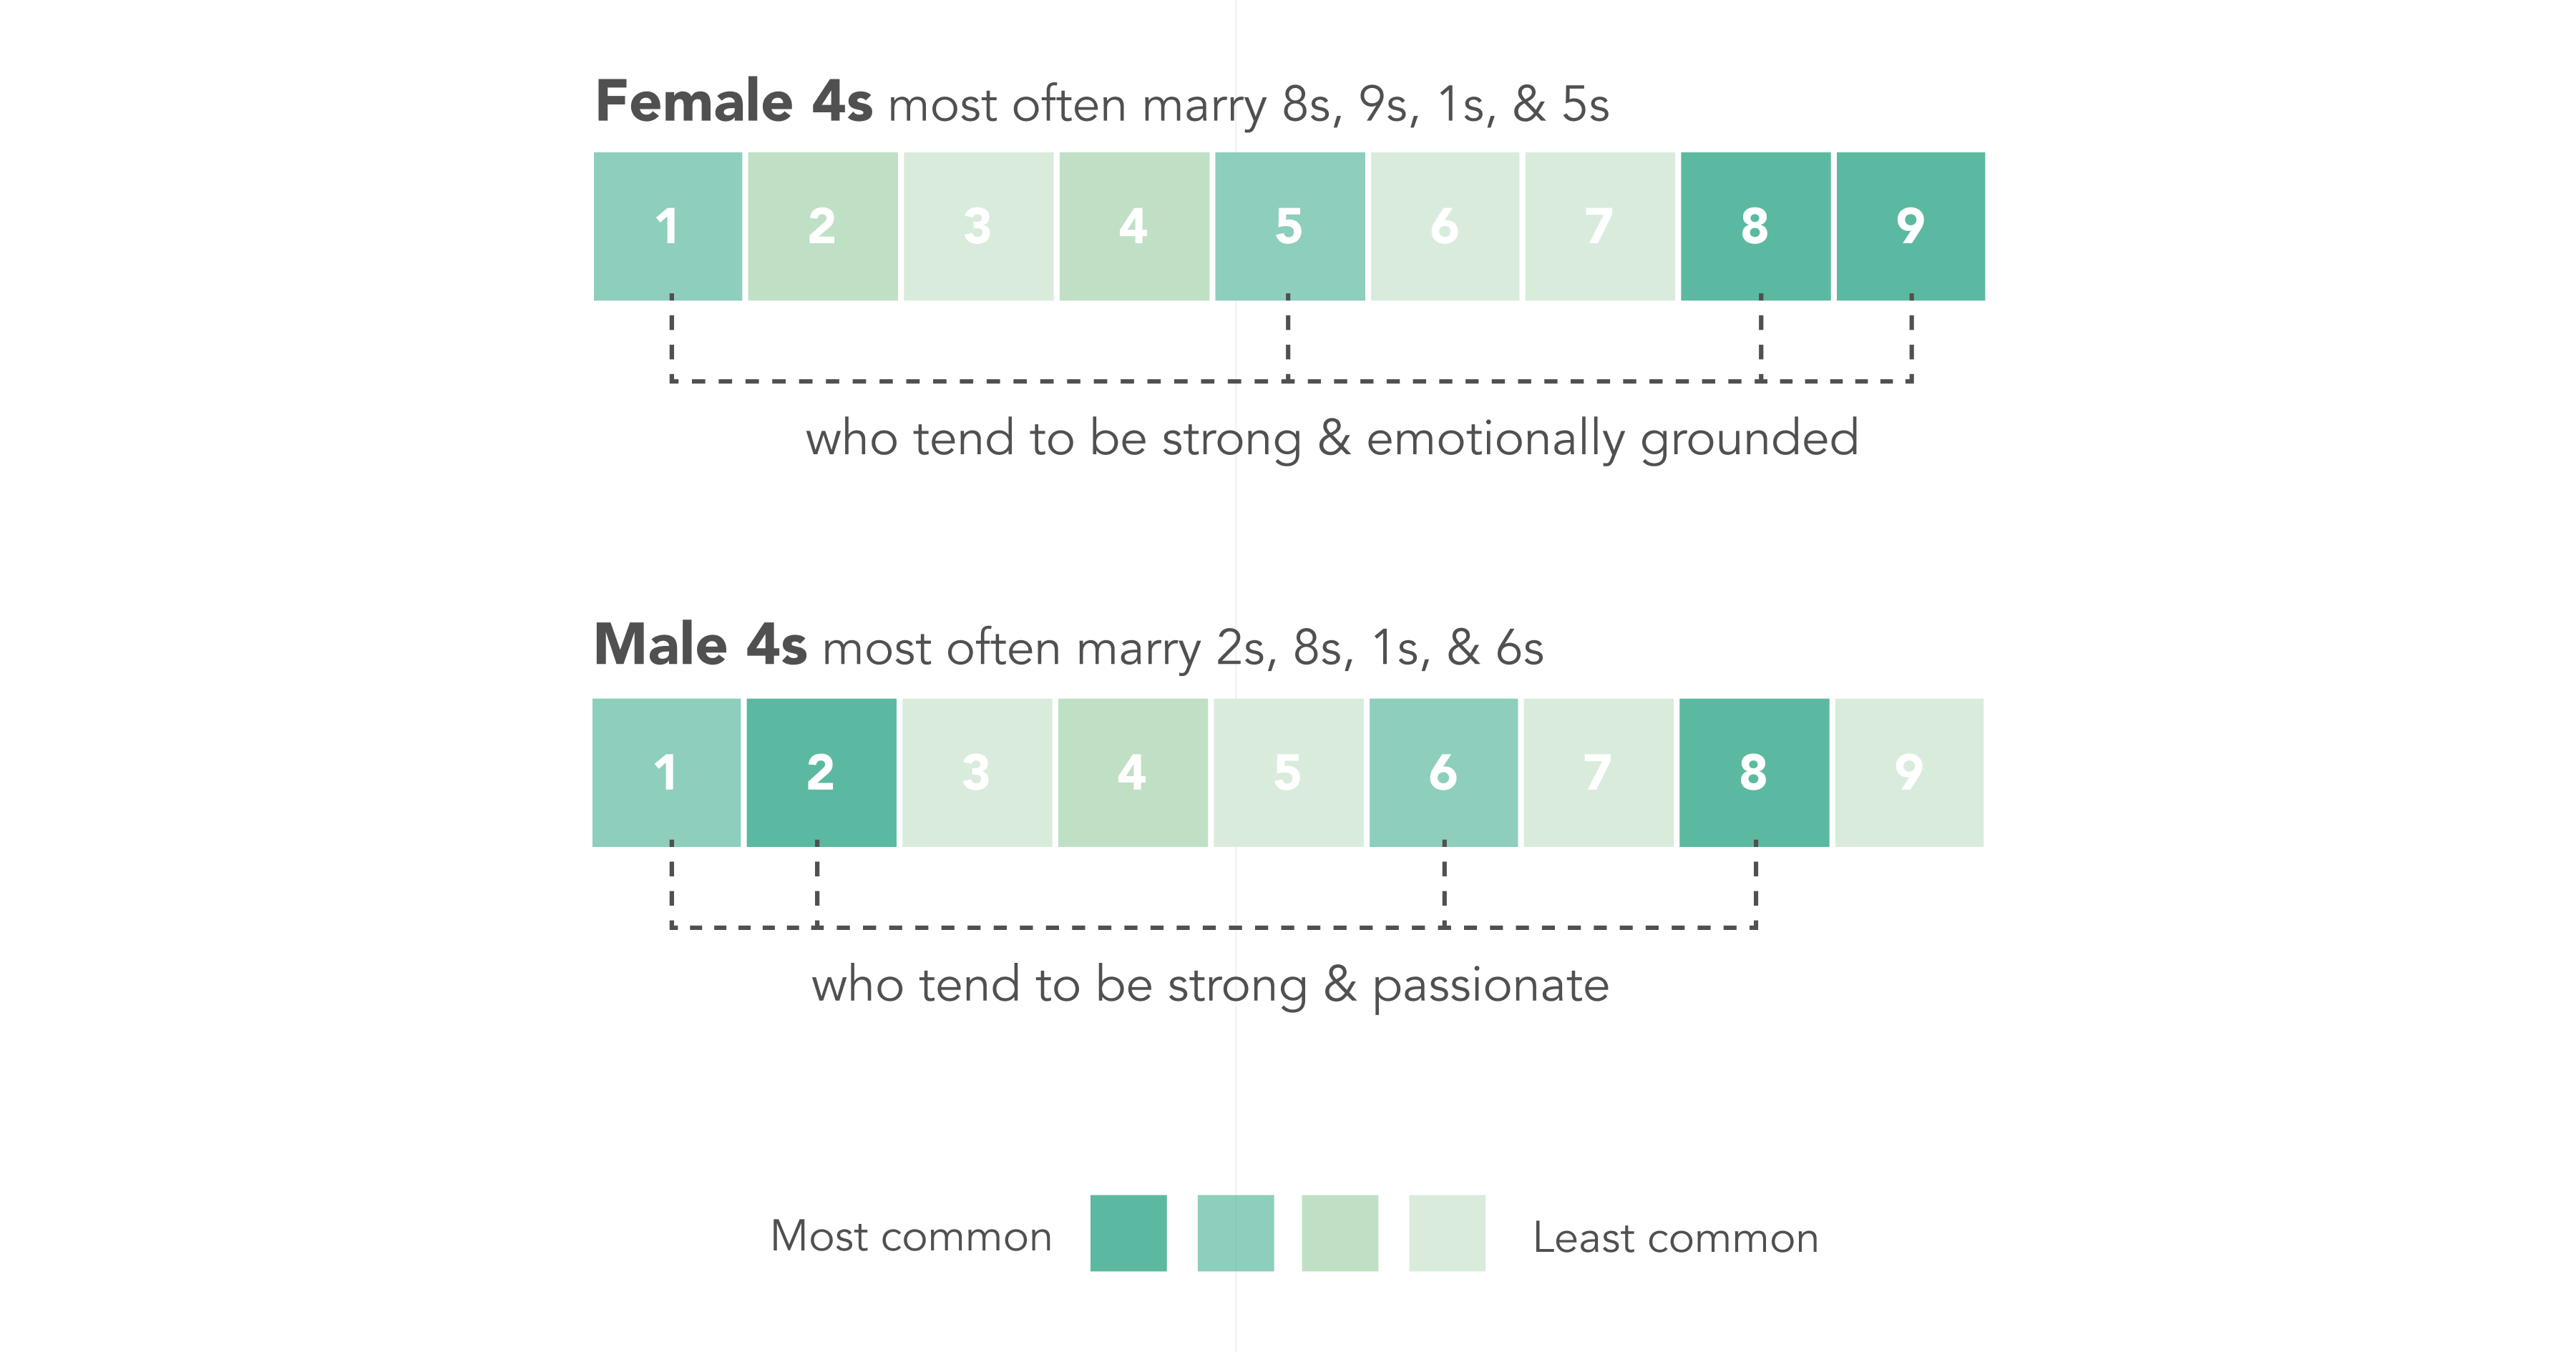 Female 4s most often marrying 8s, 9s, 1s, and 5s, and Male 4s most often marrying 2s, 8s, 1s, and 6s (in that order)